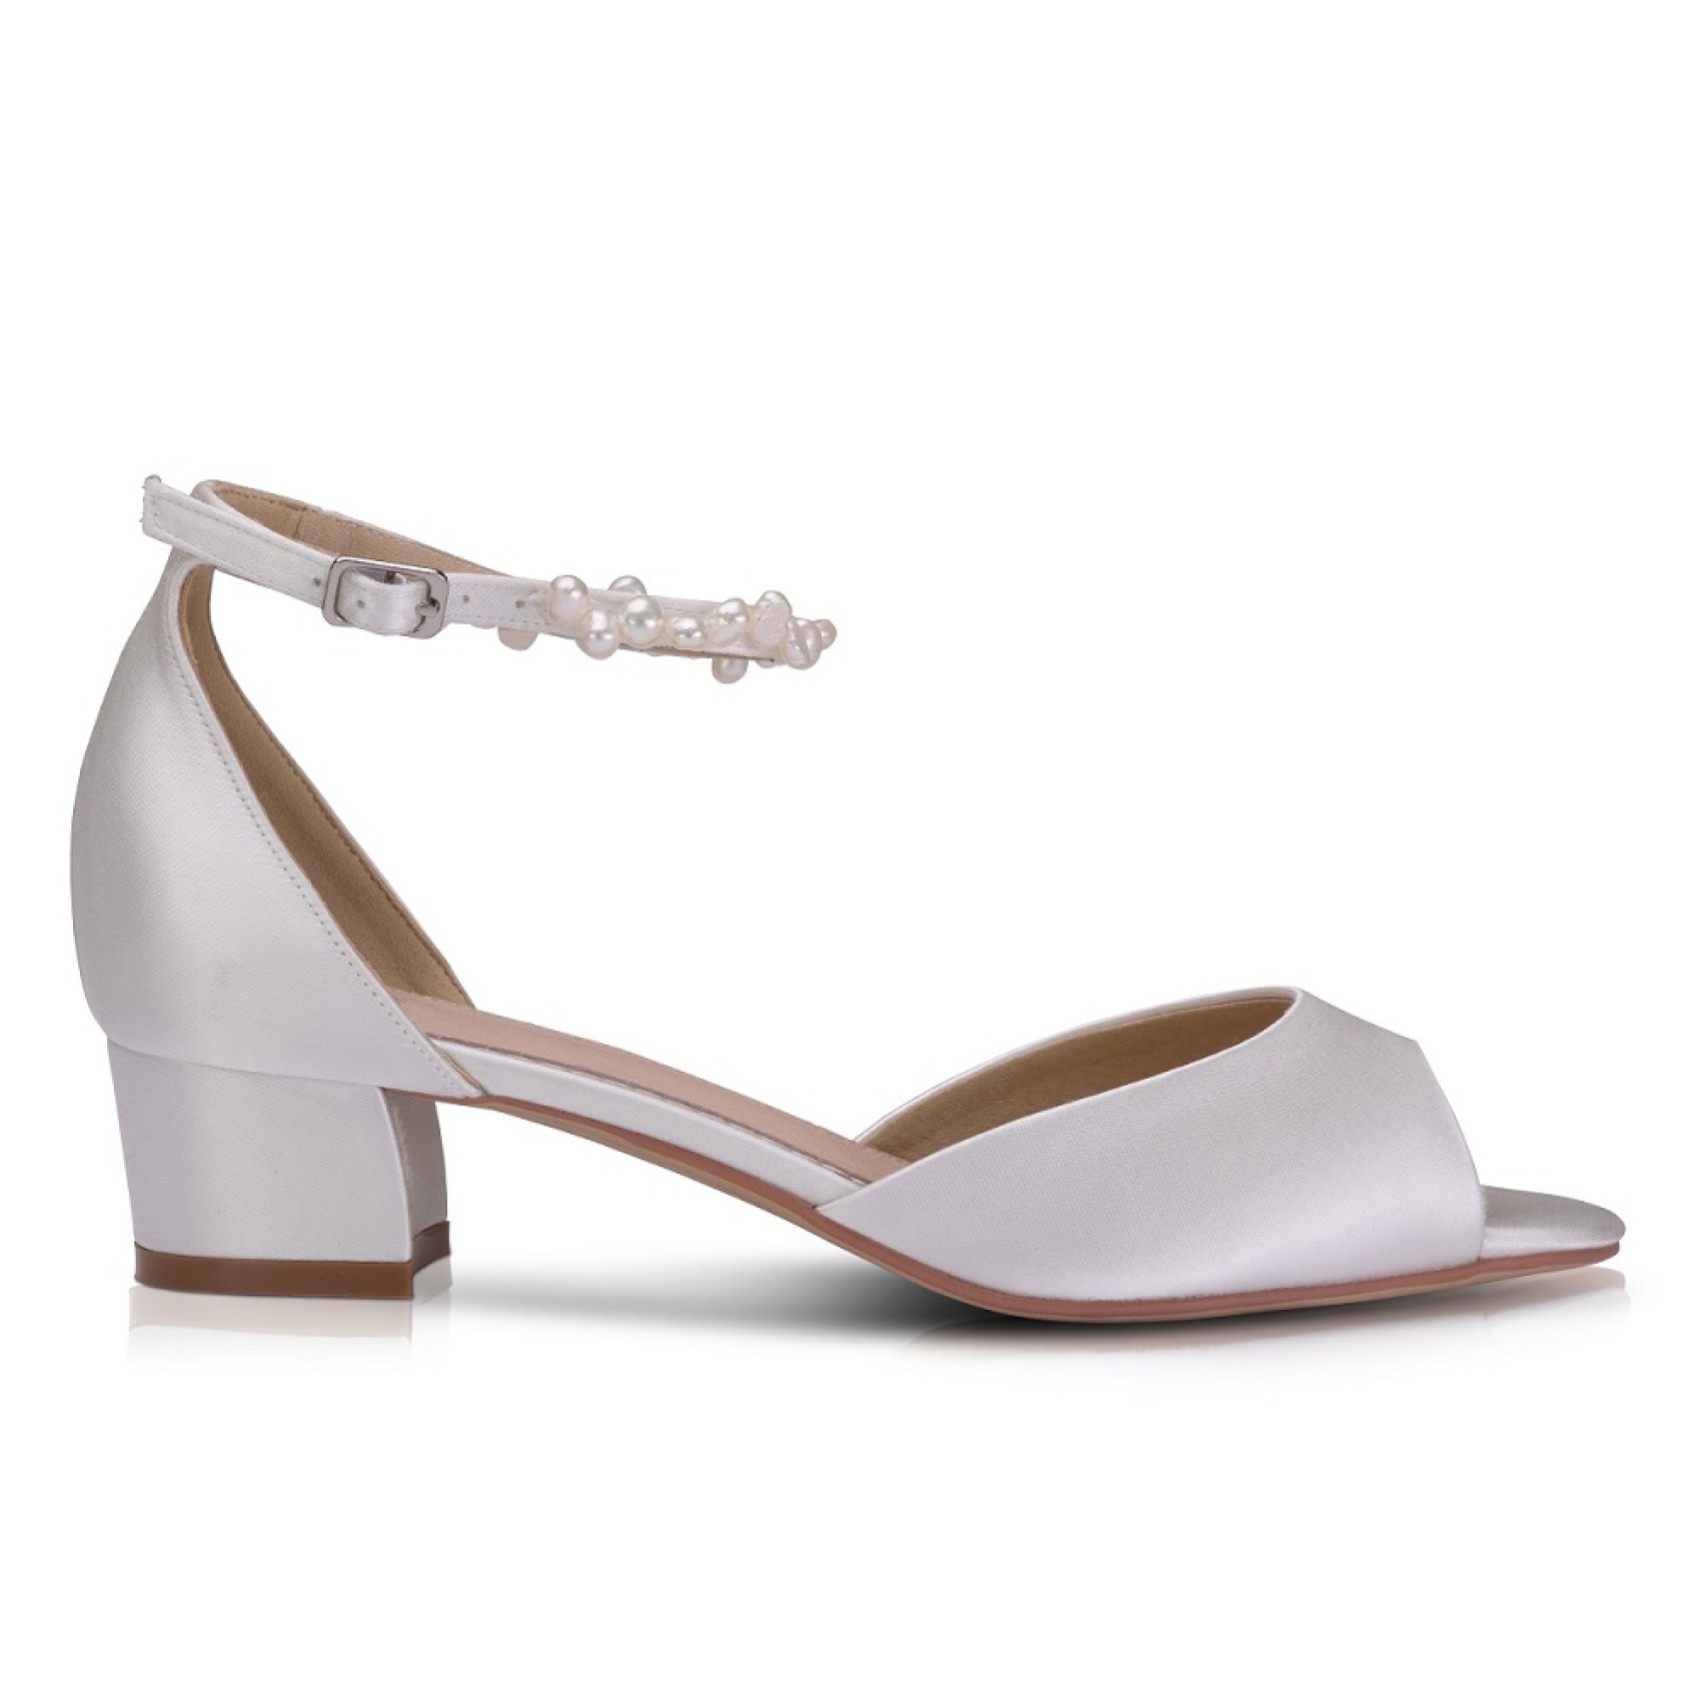 Perfect Bridal Fiona Ivory Satin Block Heel Pearl Ankle Strap Sandals